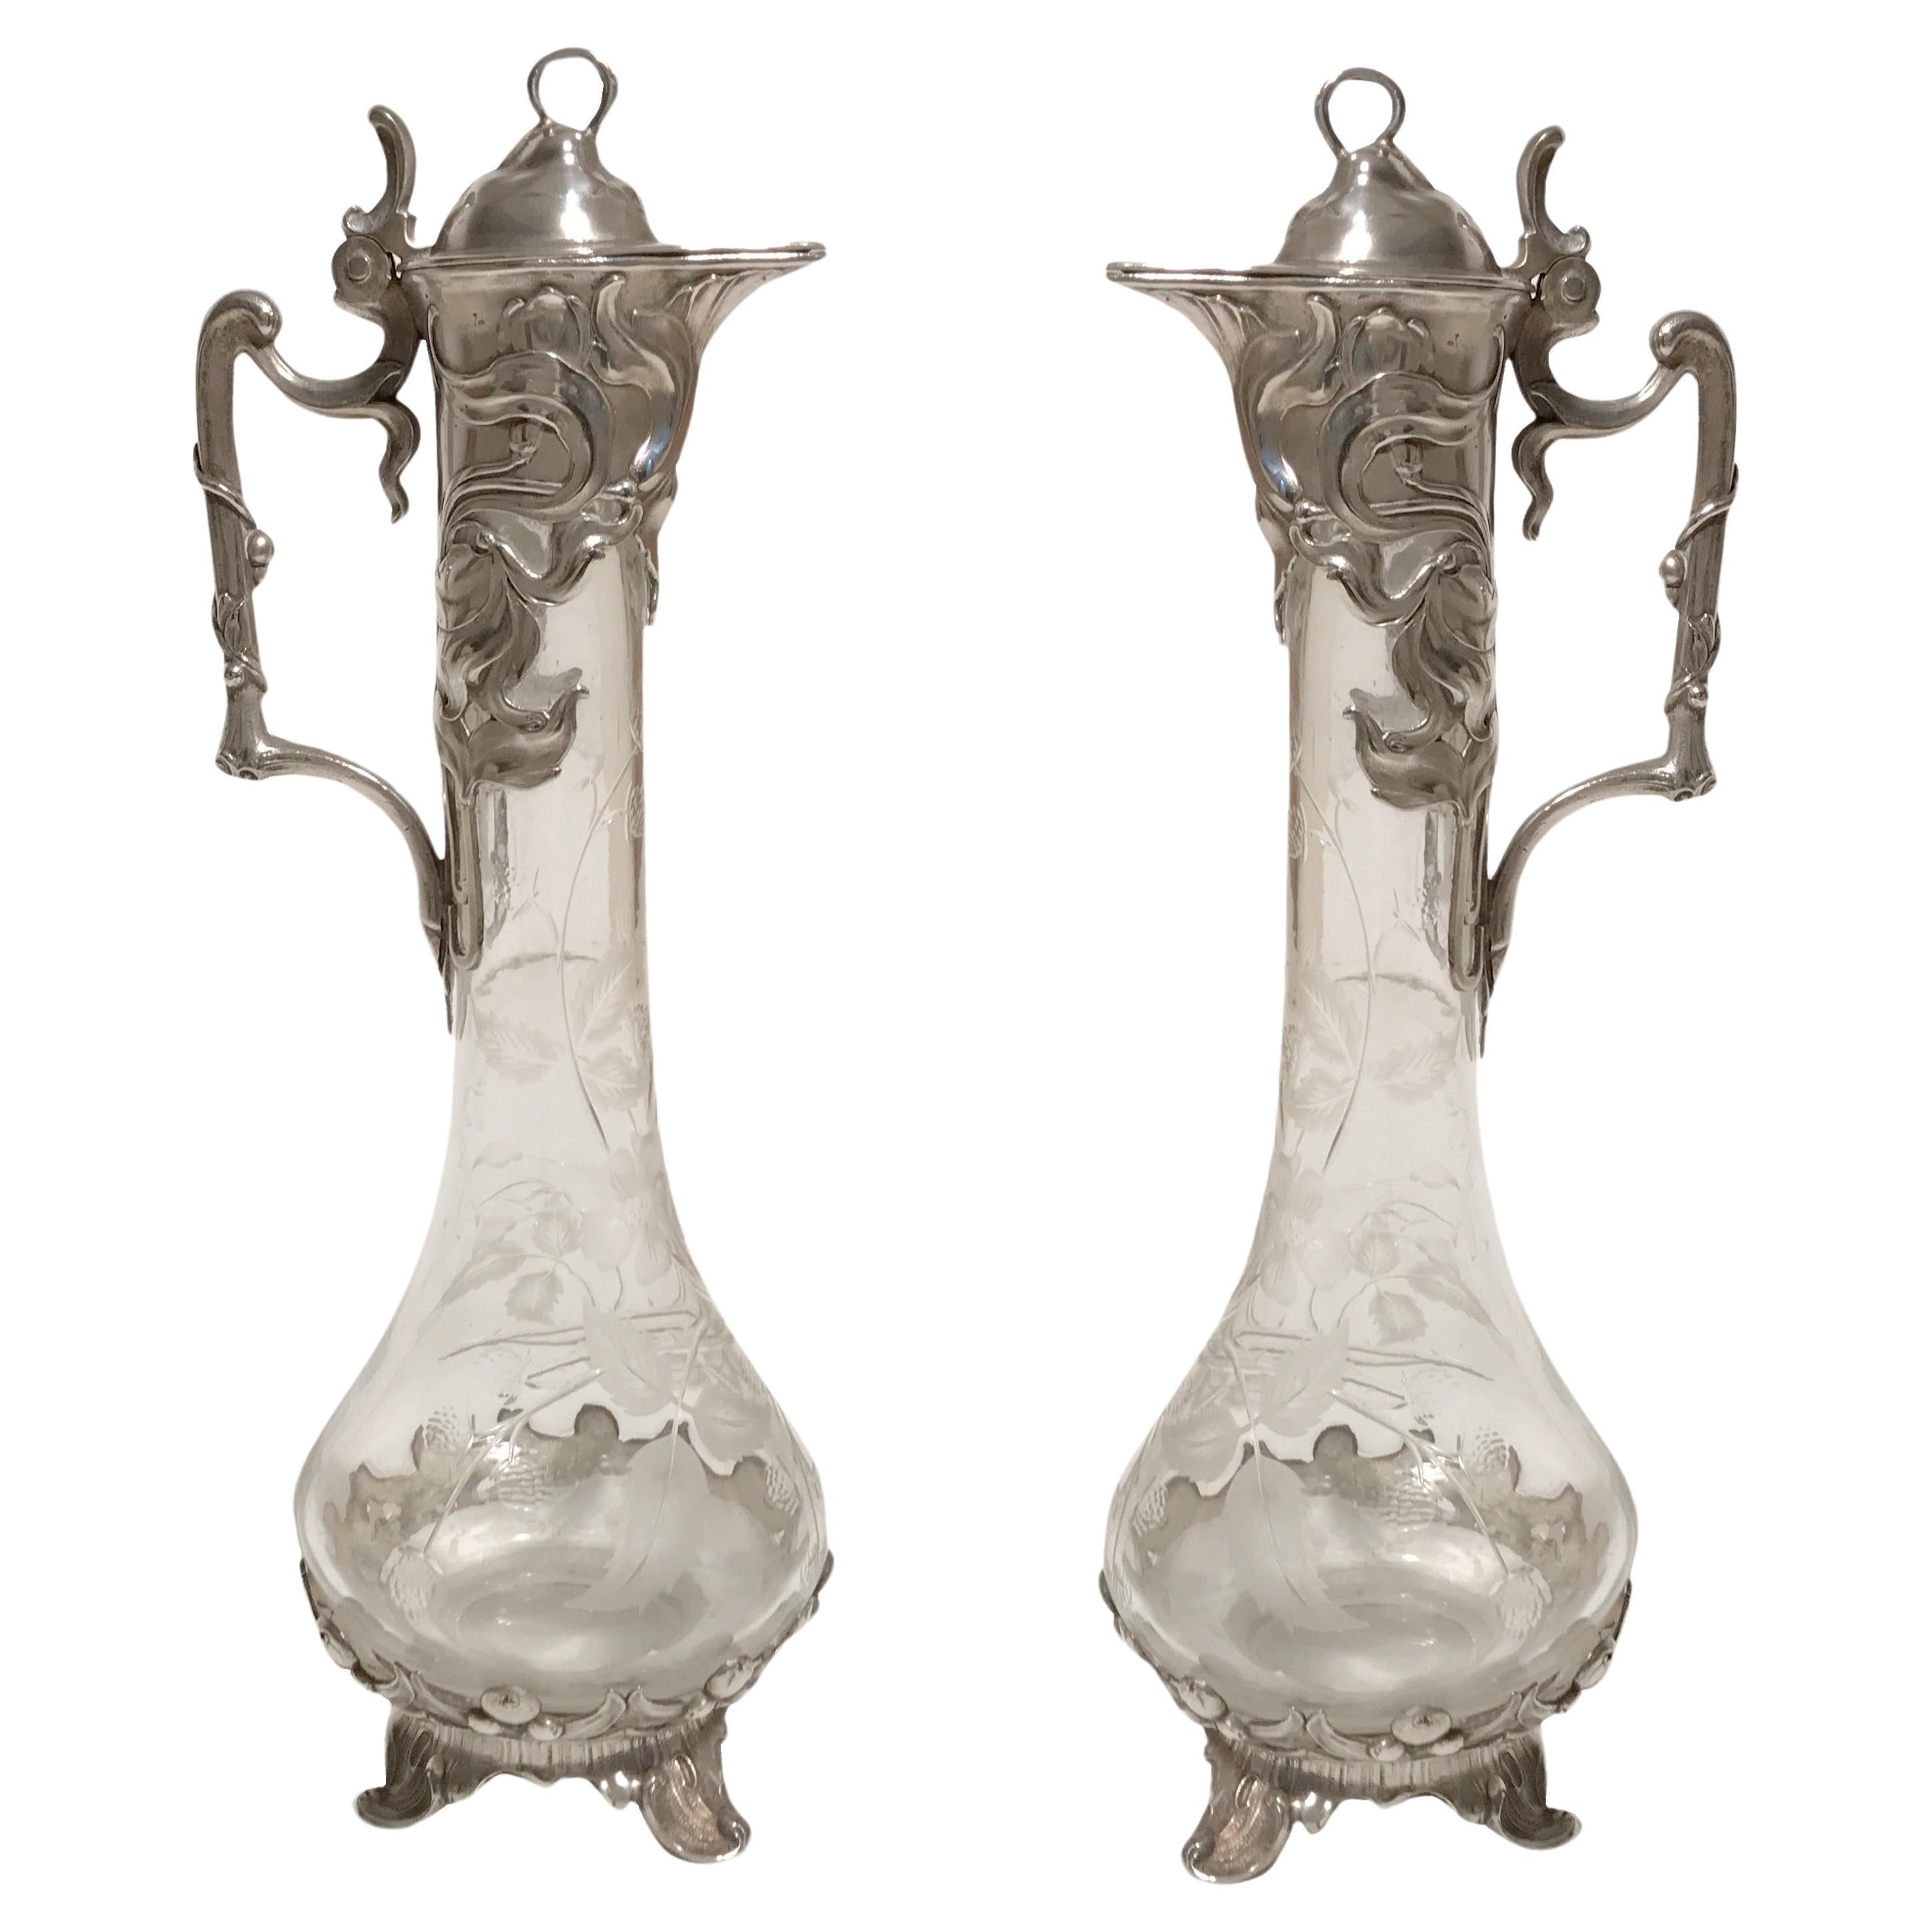 Pair of Pitchers WMF, German, 1909 in Silver Plated , Style: Jugendstil